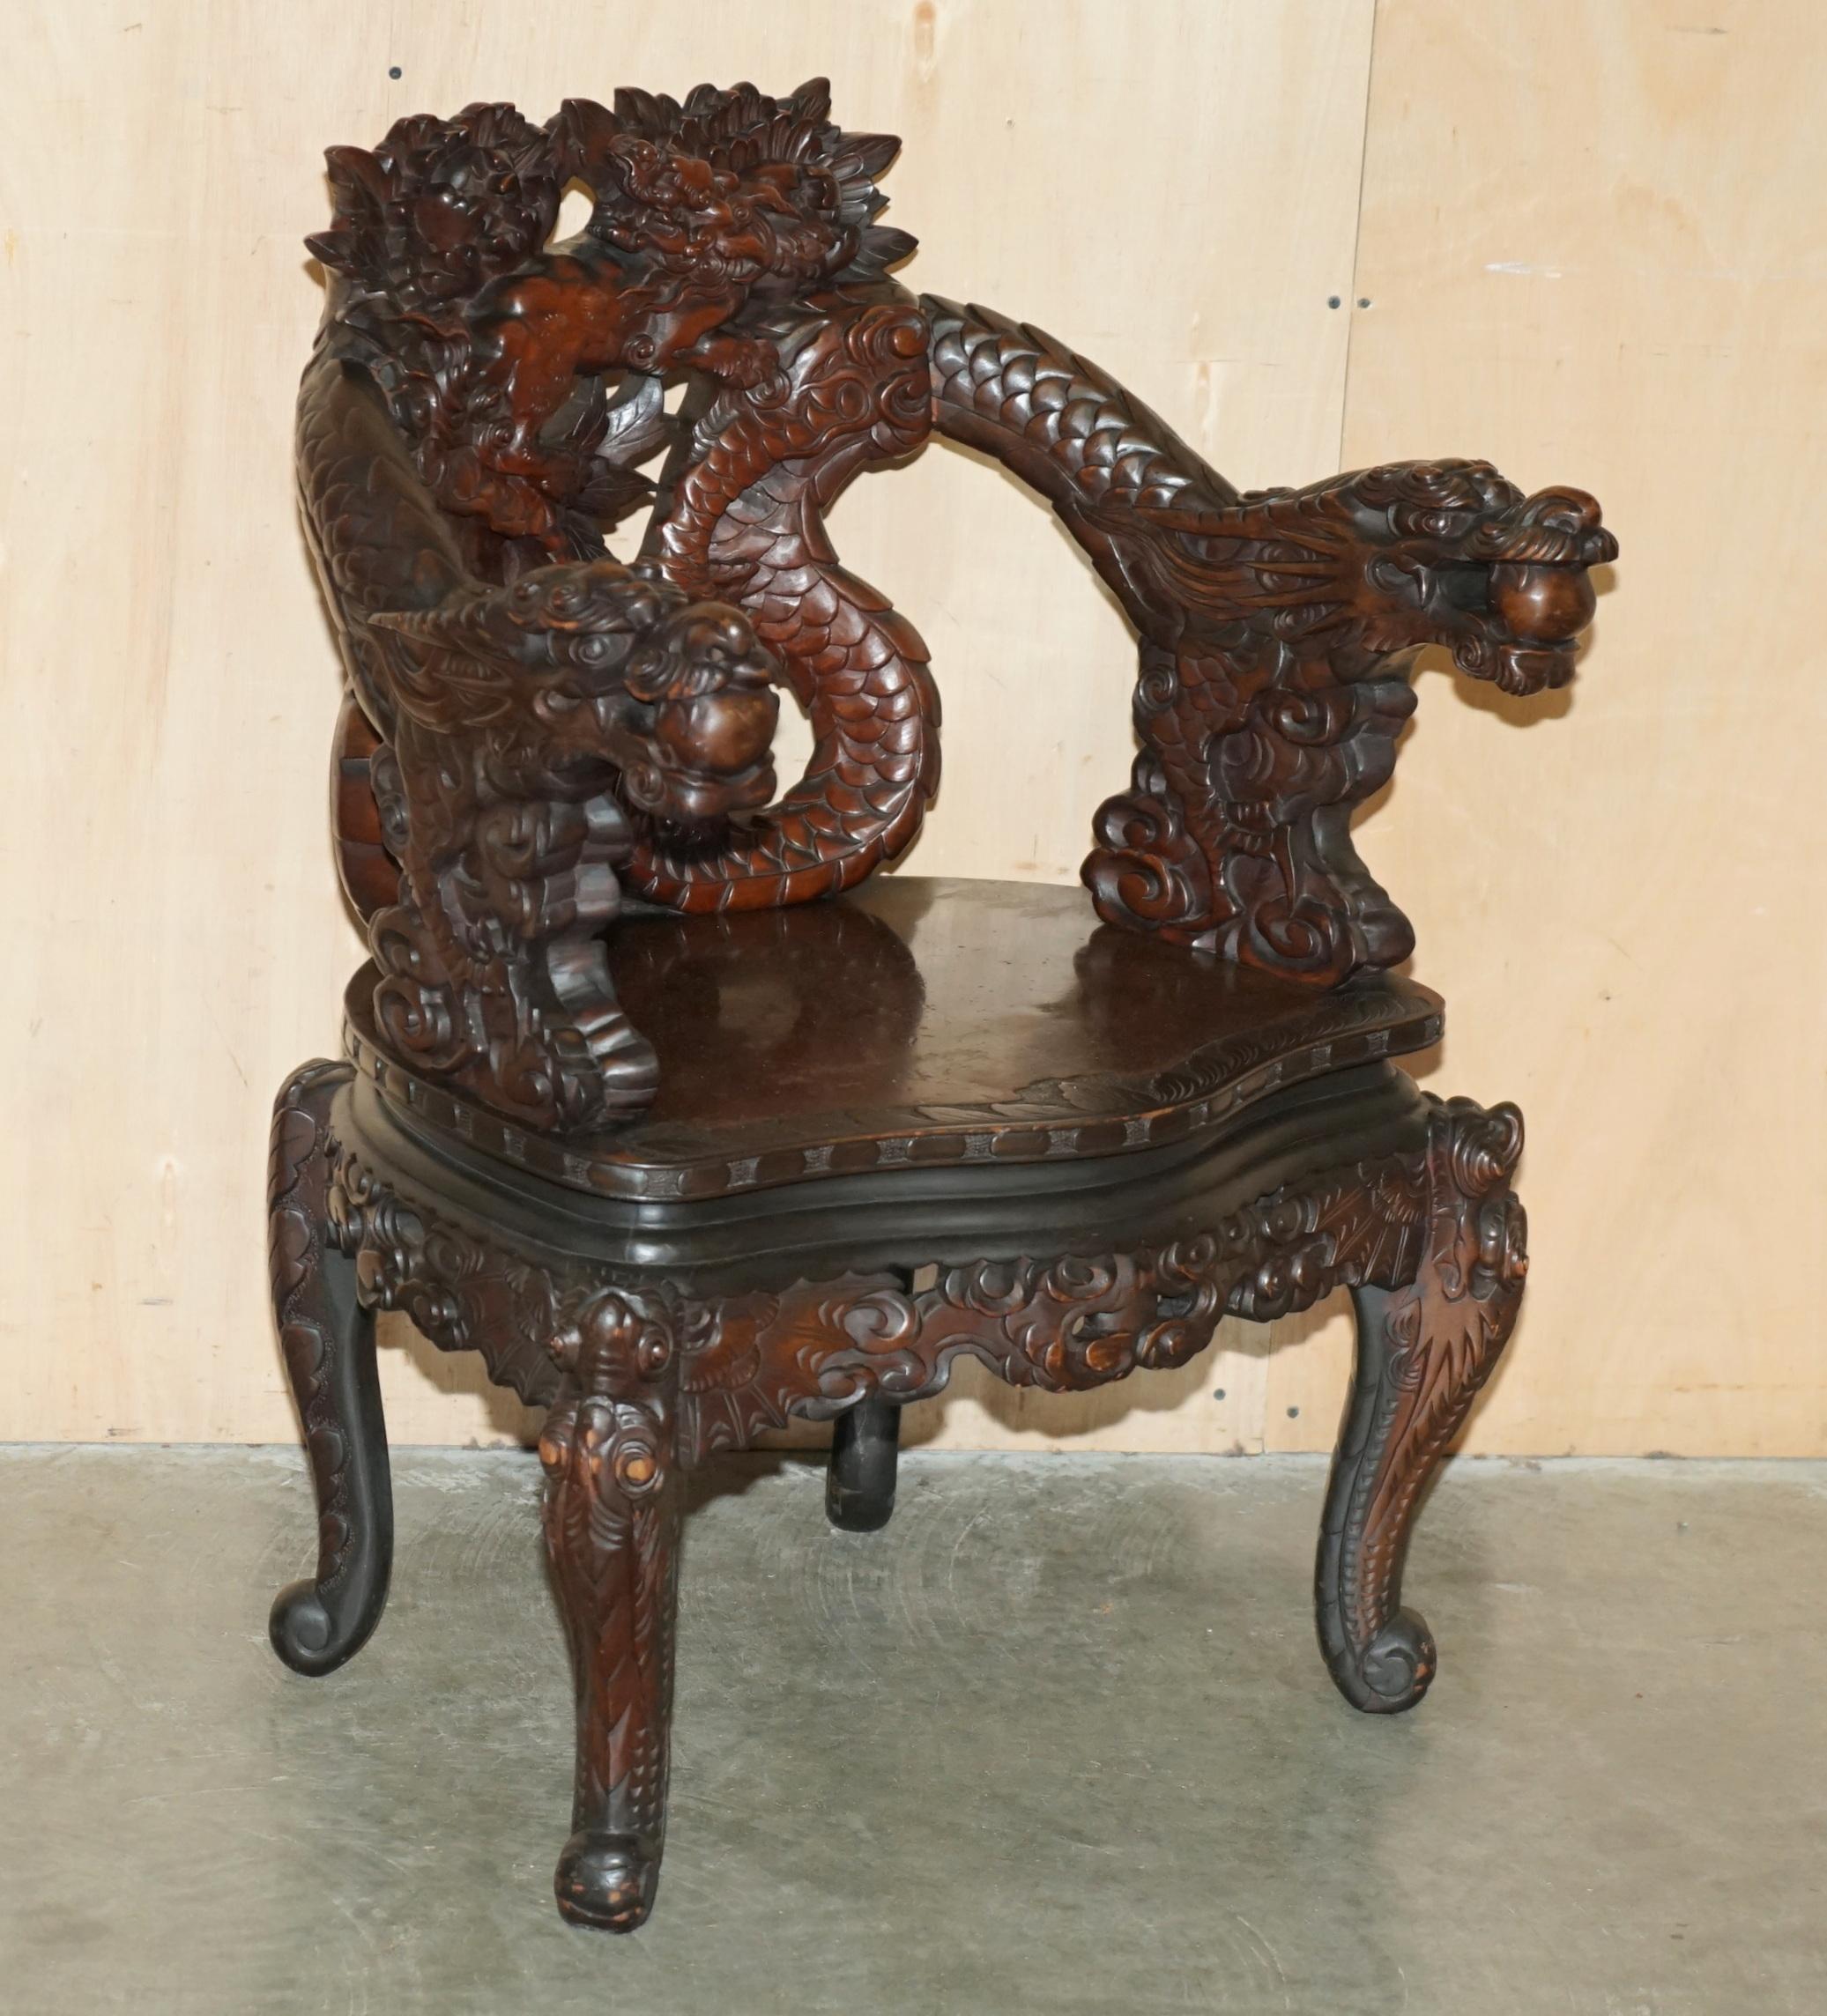 Royal House Antiques

Royal House Antiques is delighted to offer for sale this stunning original Chinese Export circa 1880-1900 hand carved Rosewood armchair with oversized curled Dragon

Please note the delivery fee listed is just a guide, it